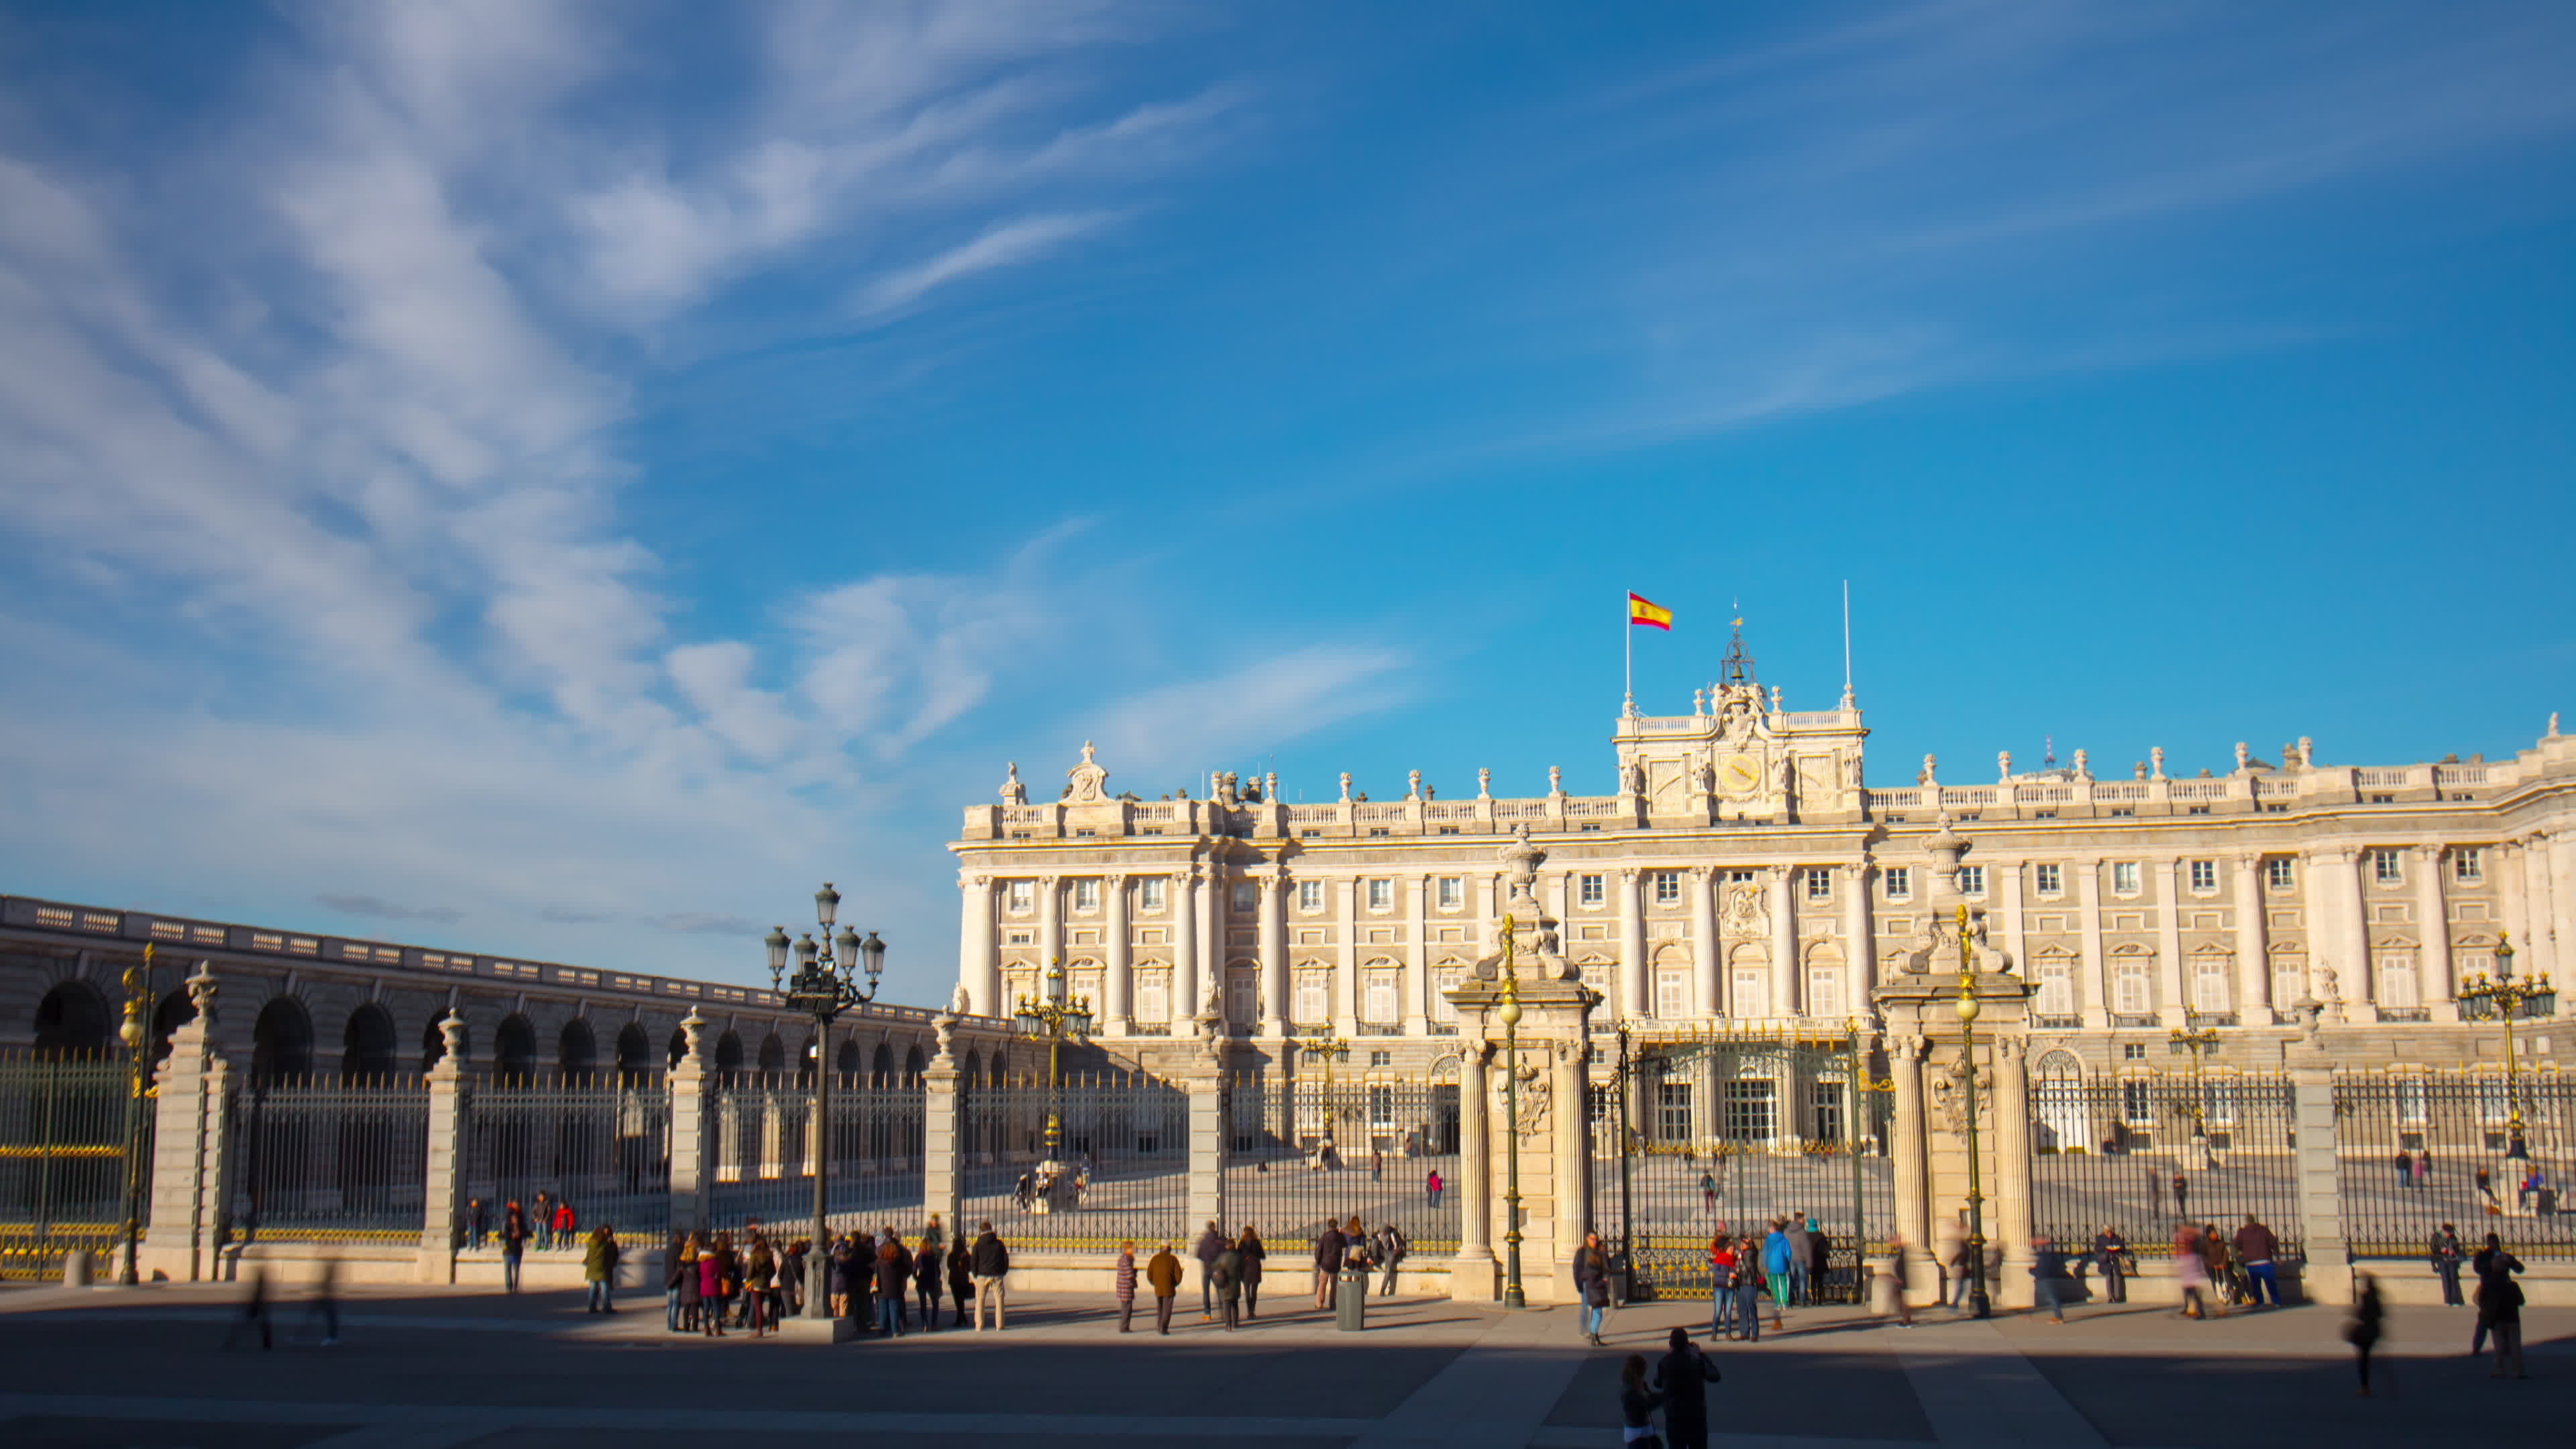 Palace: The Royal Palace of Madrid, The official residence of the Spanish royal family. 3840x2160 4K Wallpaper.